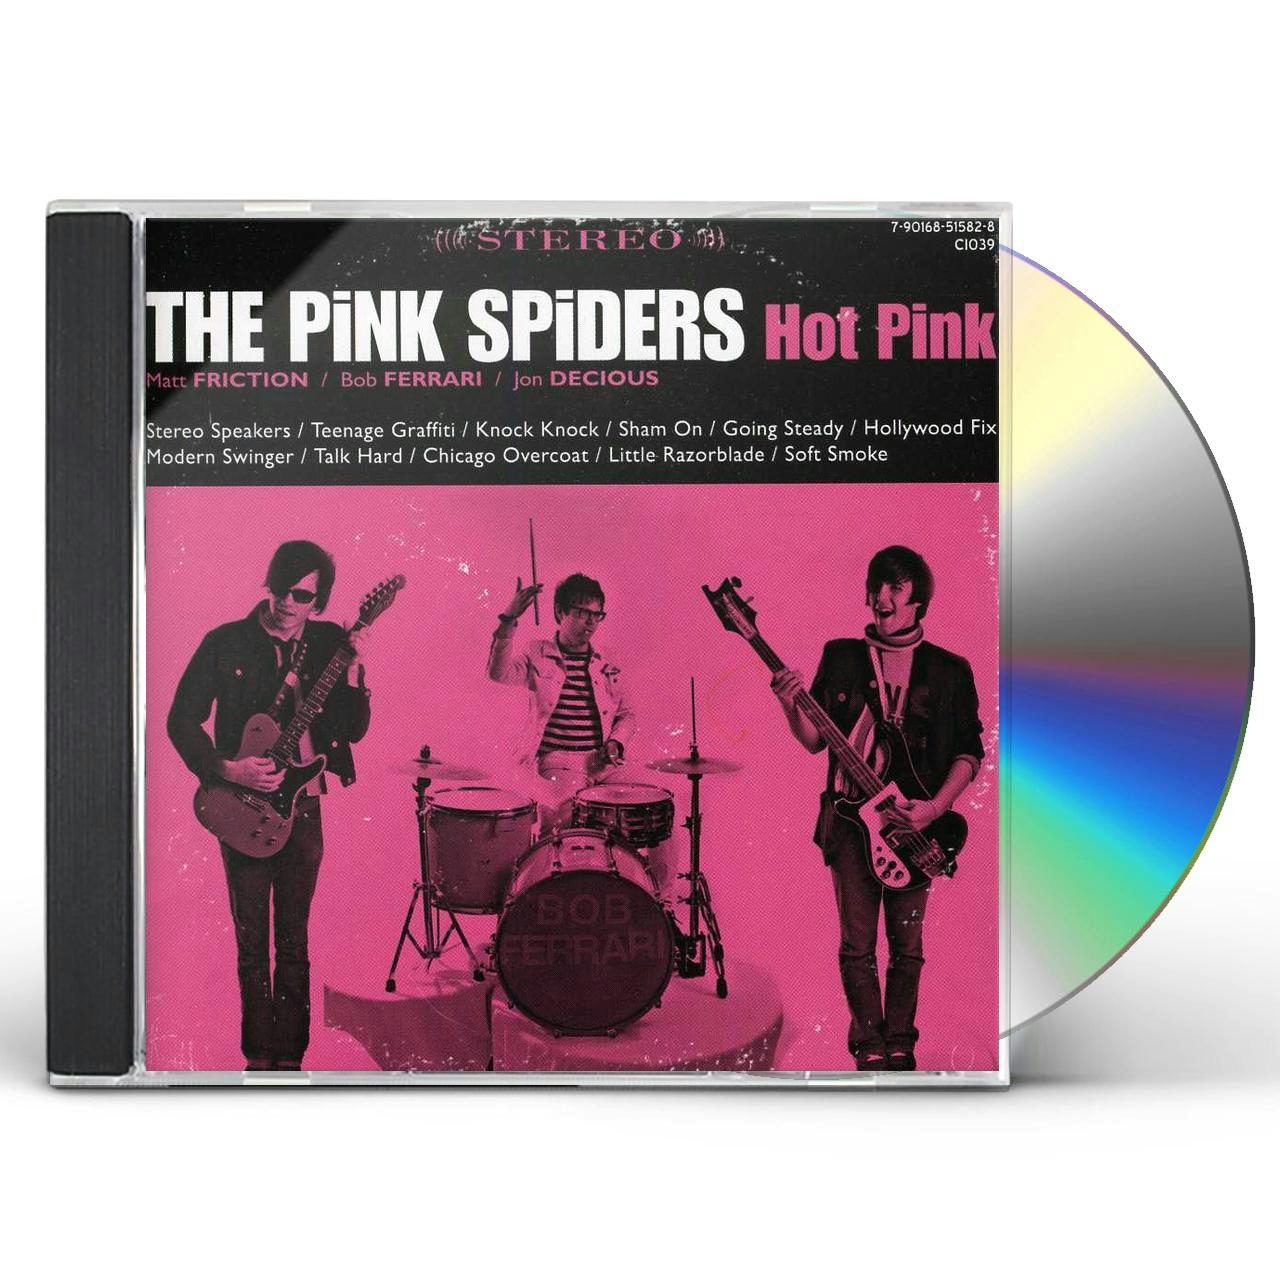 The Pink Spiders HOT PINK CD